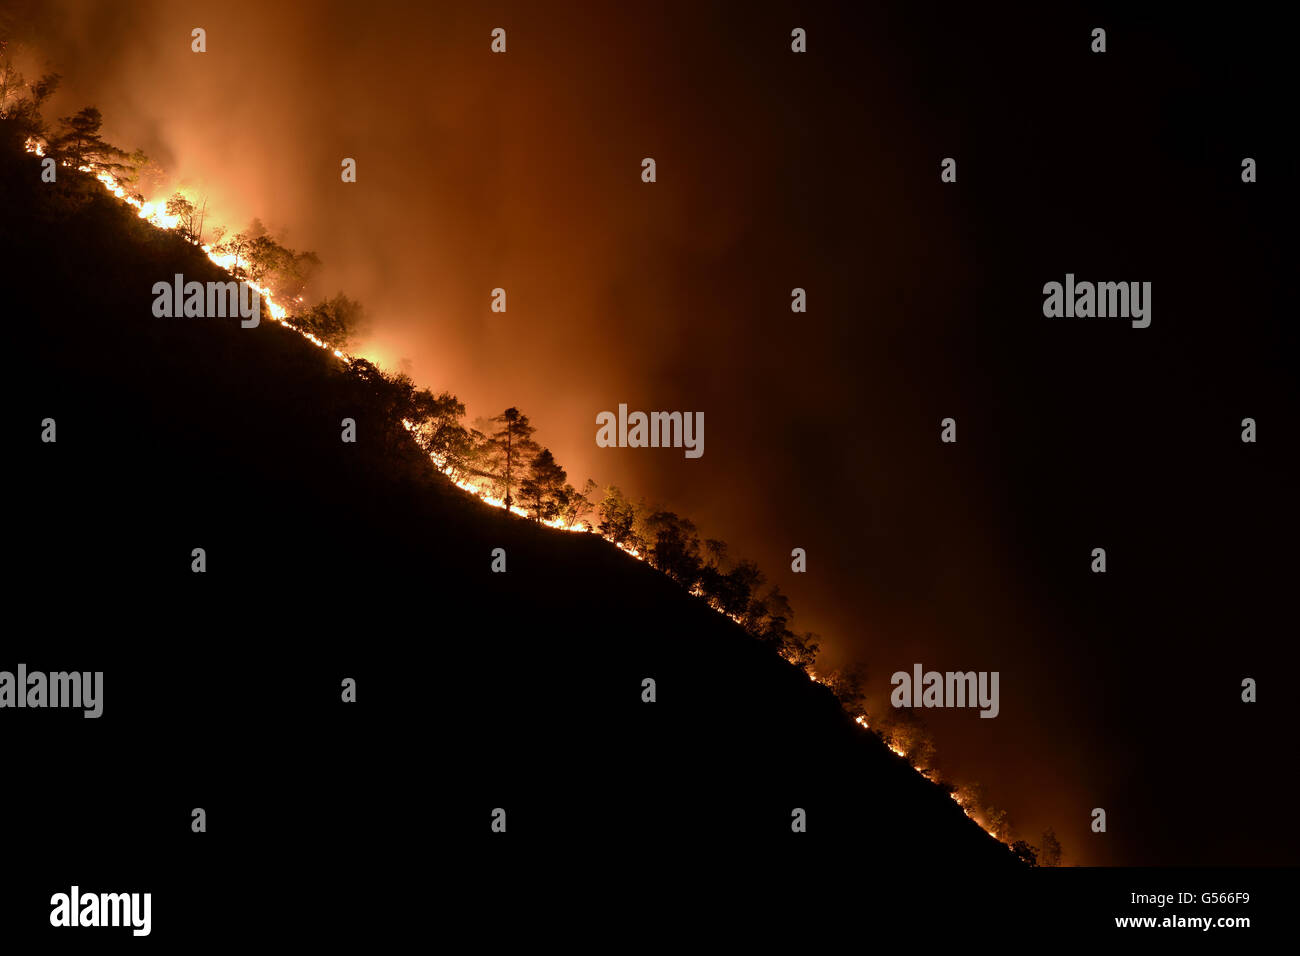 Forest fire at night, Italian Alps, Italy, August Stock Photo